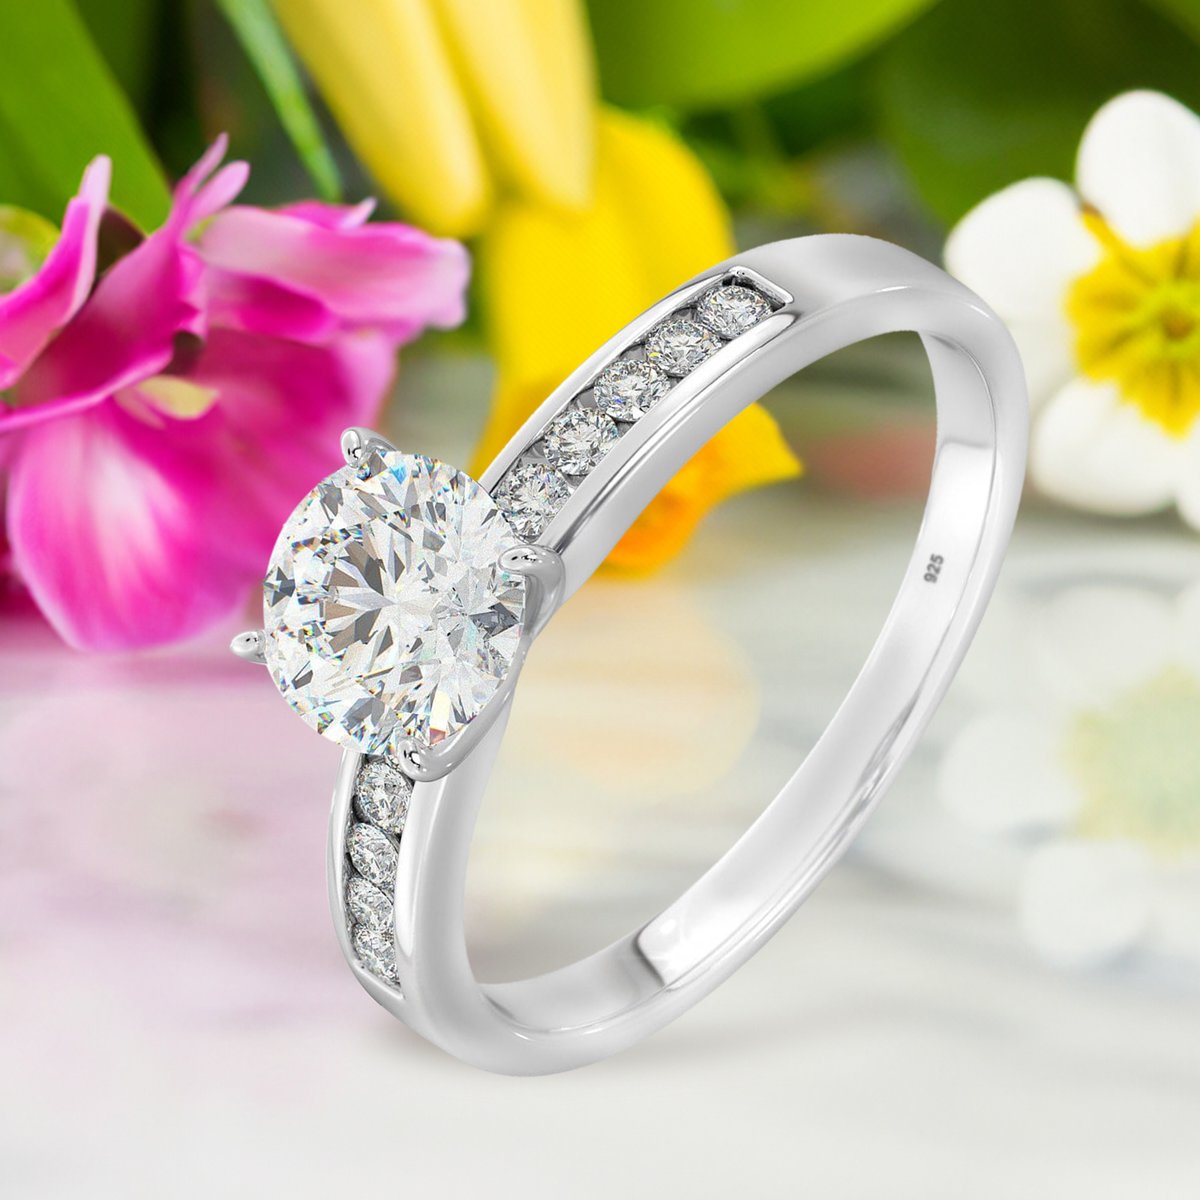 Sterling Silver & Cubic Zirconia Solitaire Ring Code 454 - bit.ly/2AI5fgT #womenrings #weddingrings #lovejewelry #silverjewelry #silverring #sterlingsilver #zirconia #ring #womenoutfit #weddinginspiration #bride